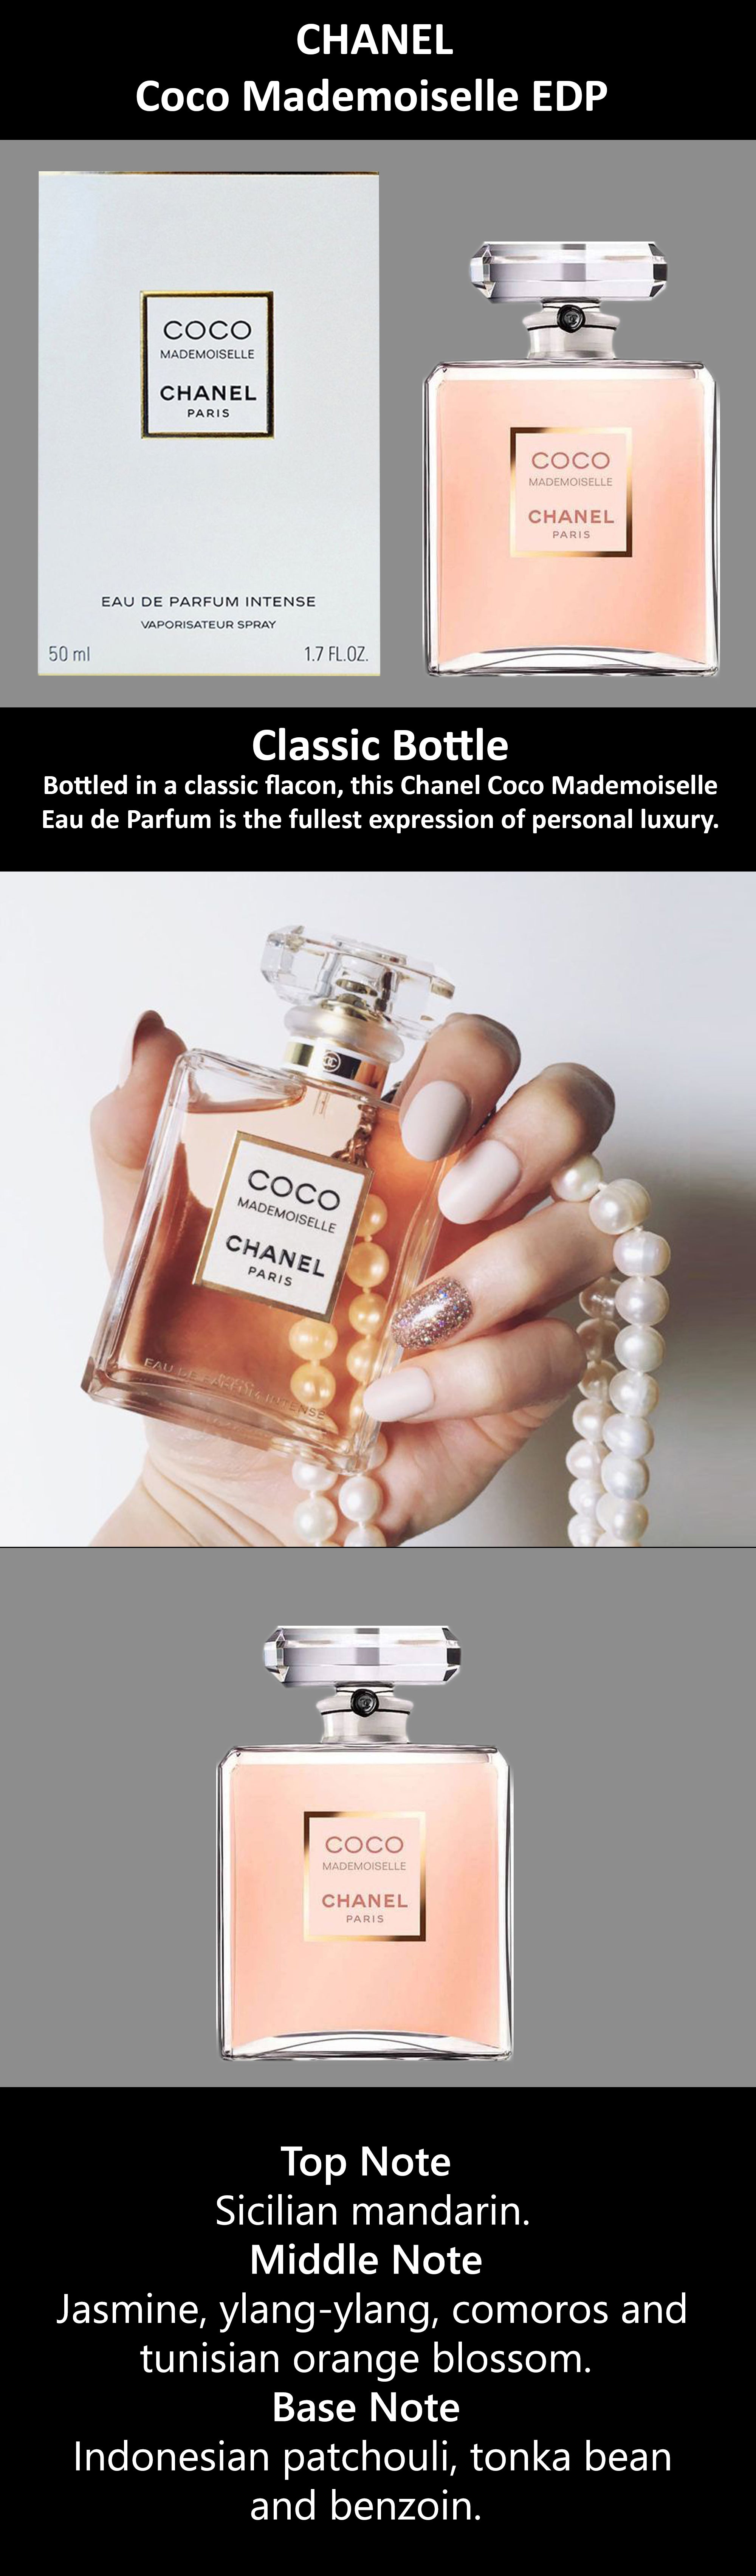 Chanel Coco Mademoiselle for Women, Eau De Parfum Spray, 1.7 Ounce  Ingredients and Reviews